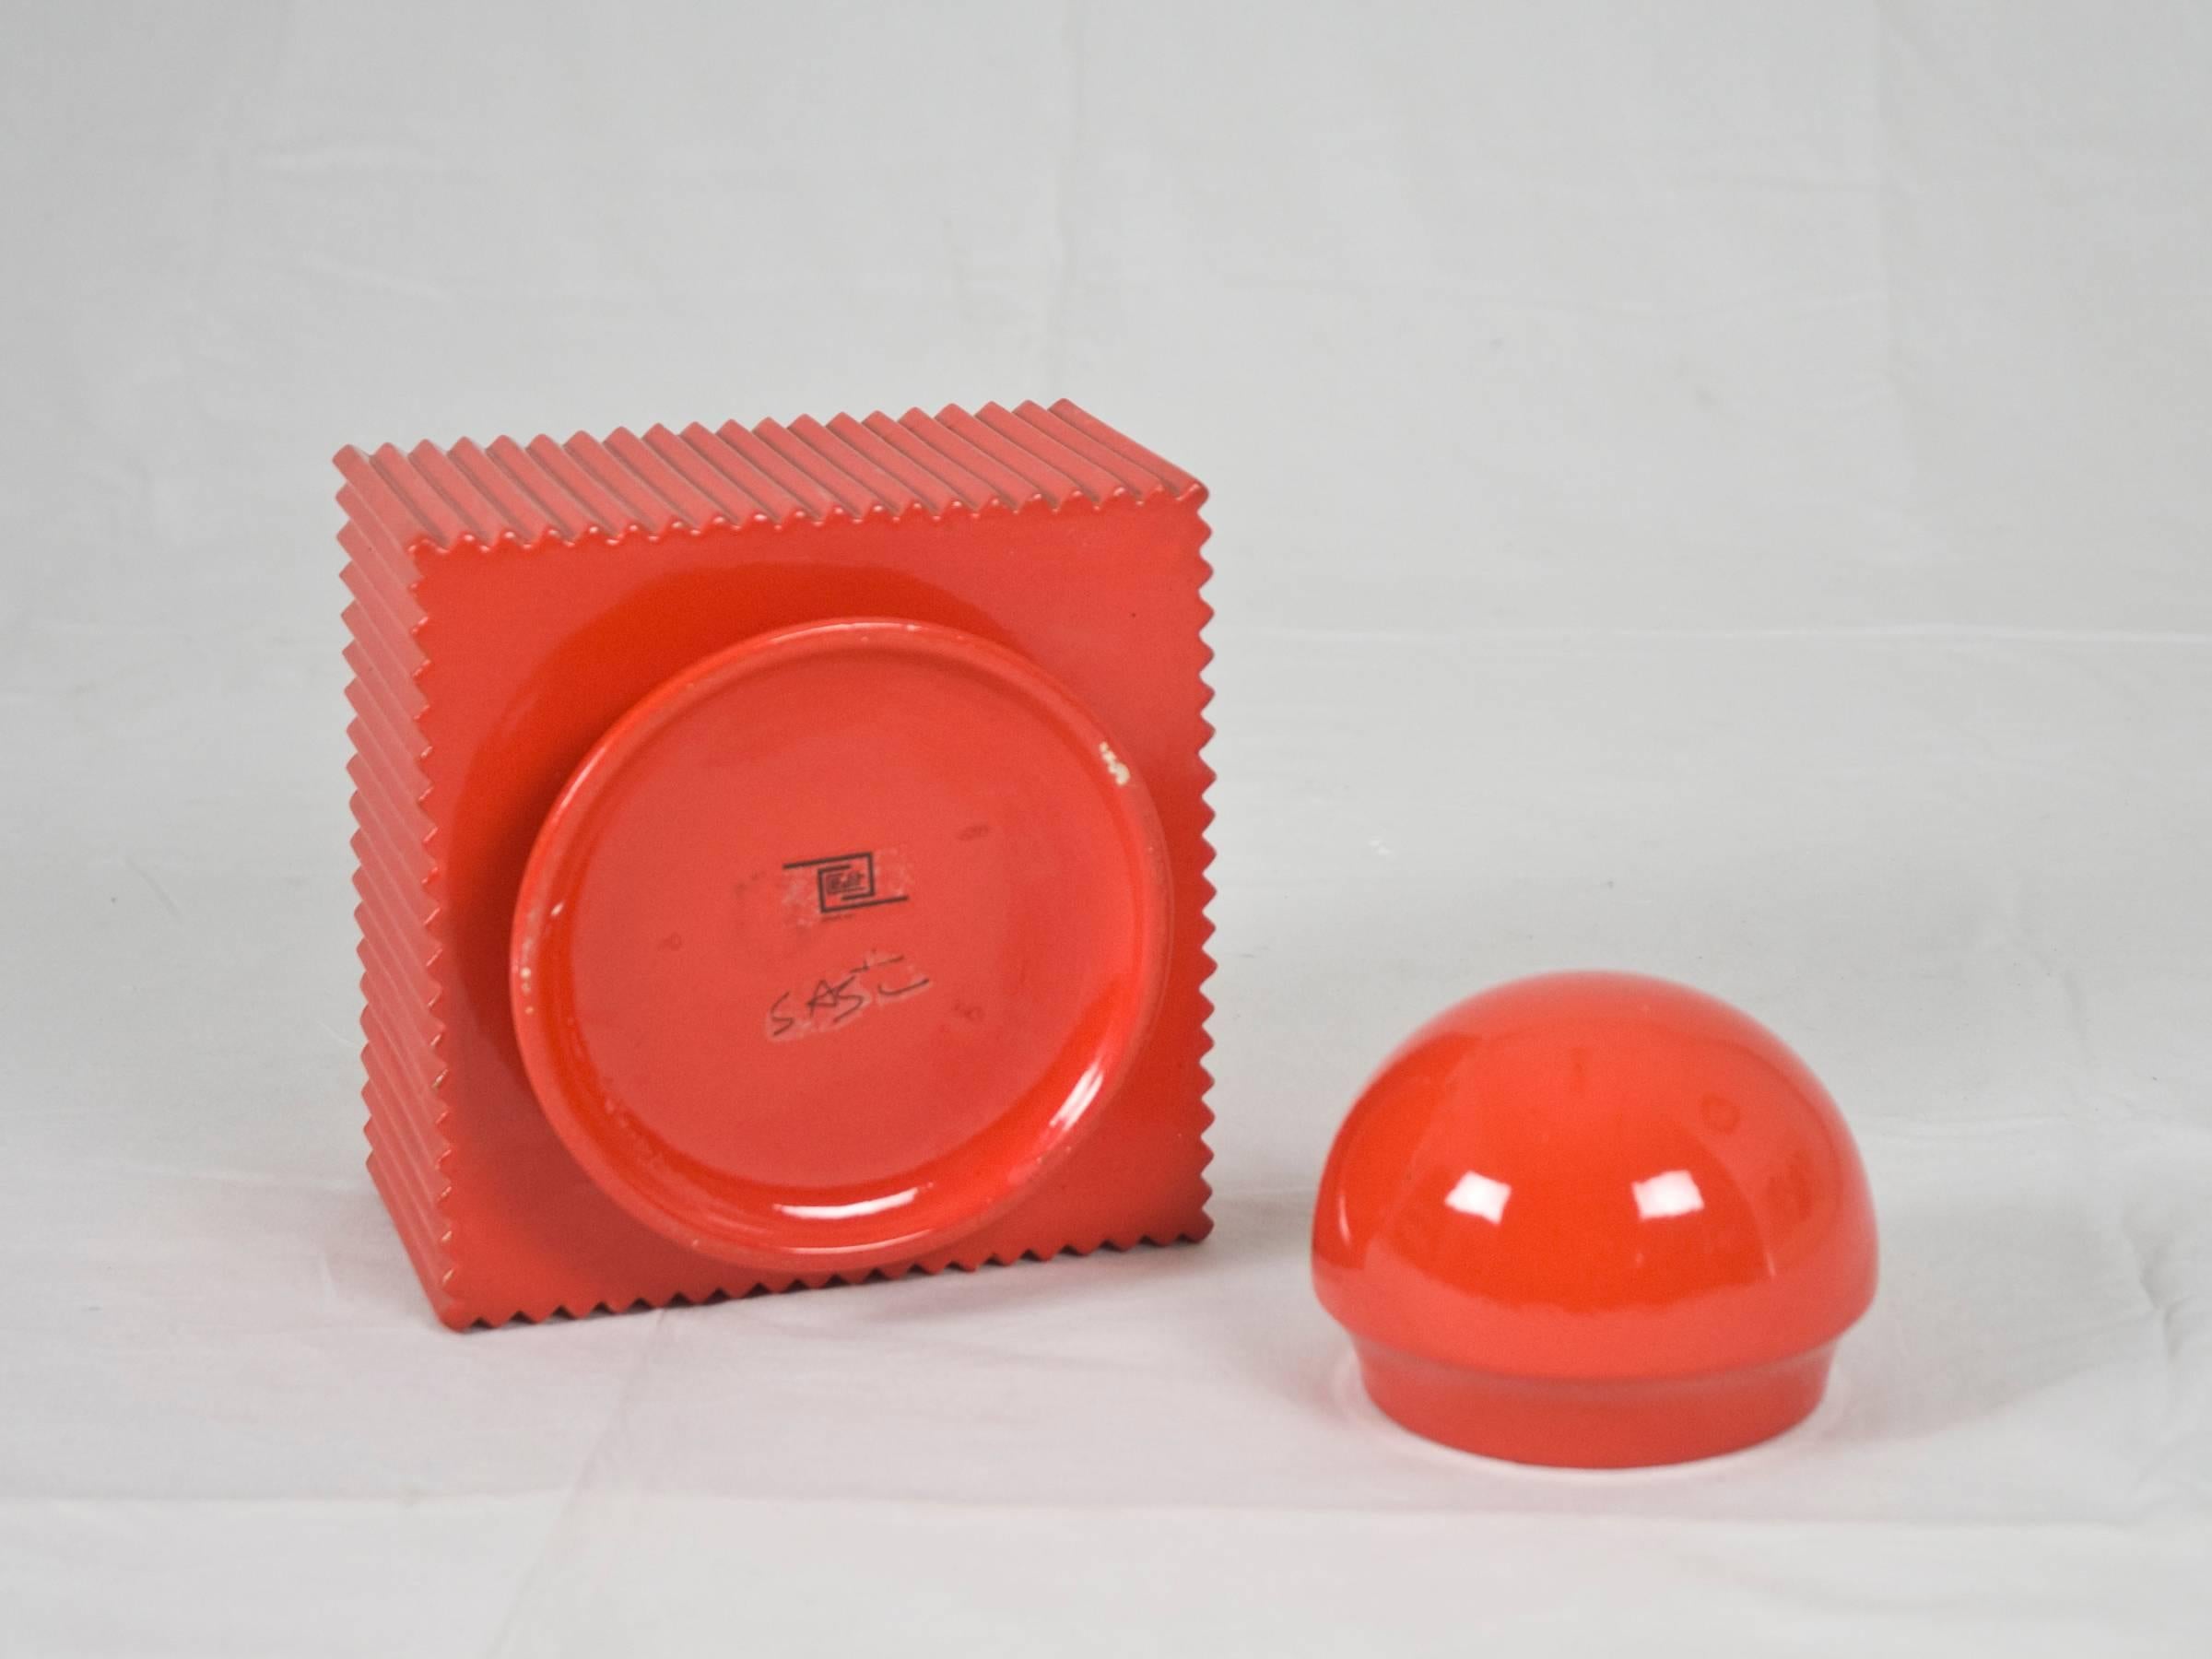 Post-Modern Vintage Red Ceramic Box by Sergio Asti for Cedit, 1970s